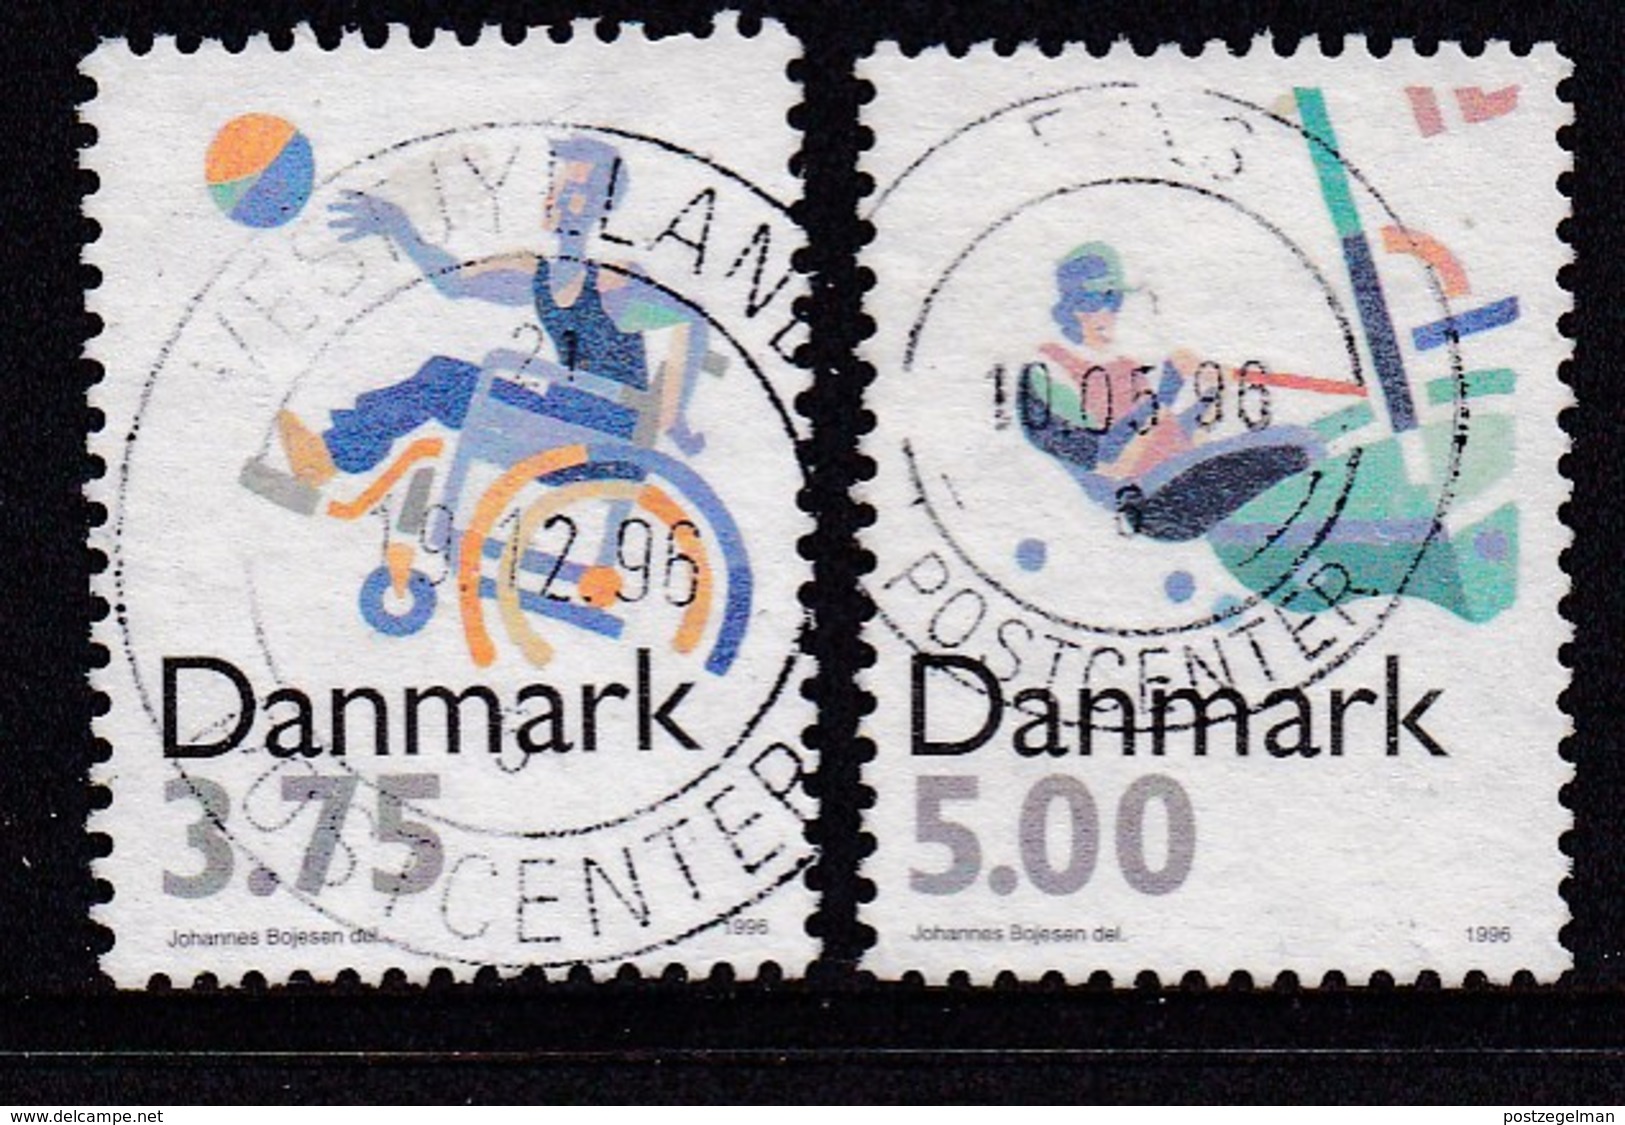 DENMARK, 1996, Used Stamp(s),Olympic Games, MI 1120=1123, #10222, 2 Values Only - Gebruikt